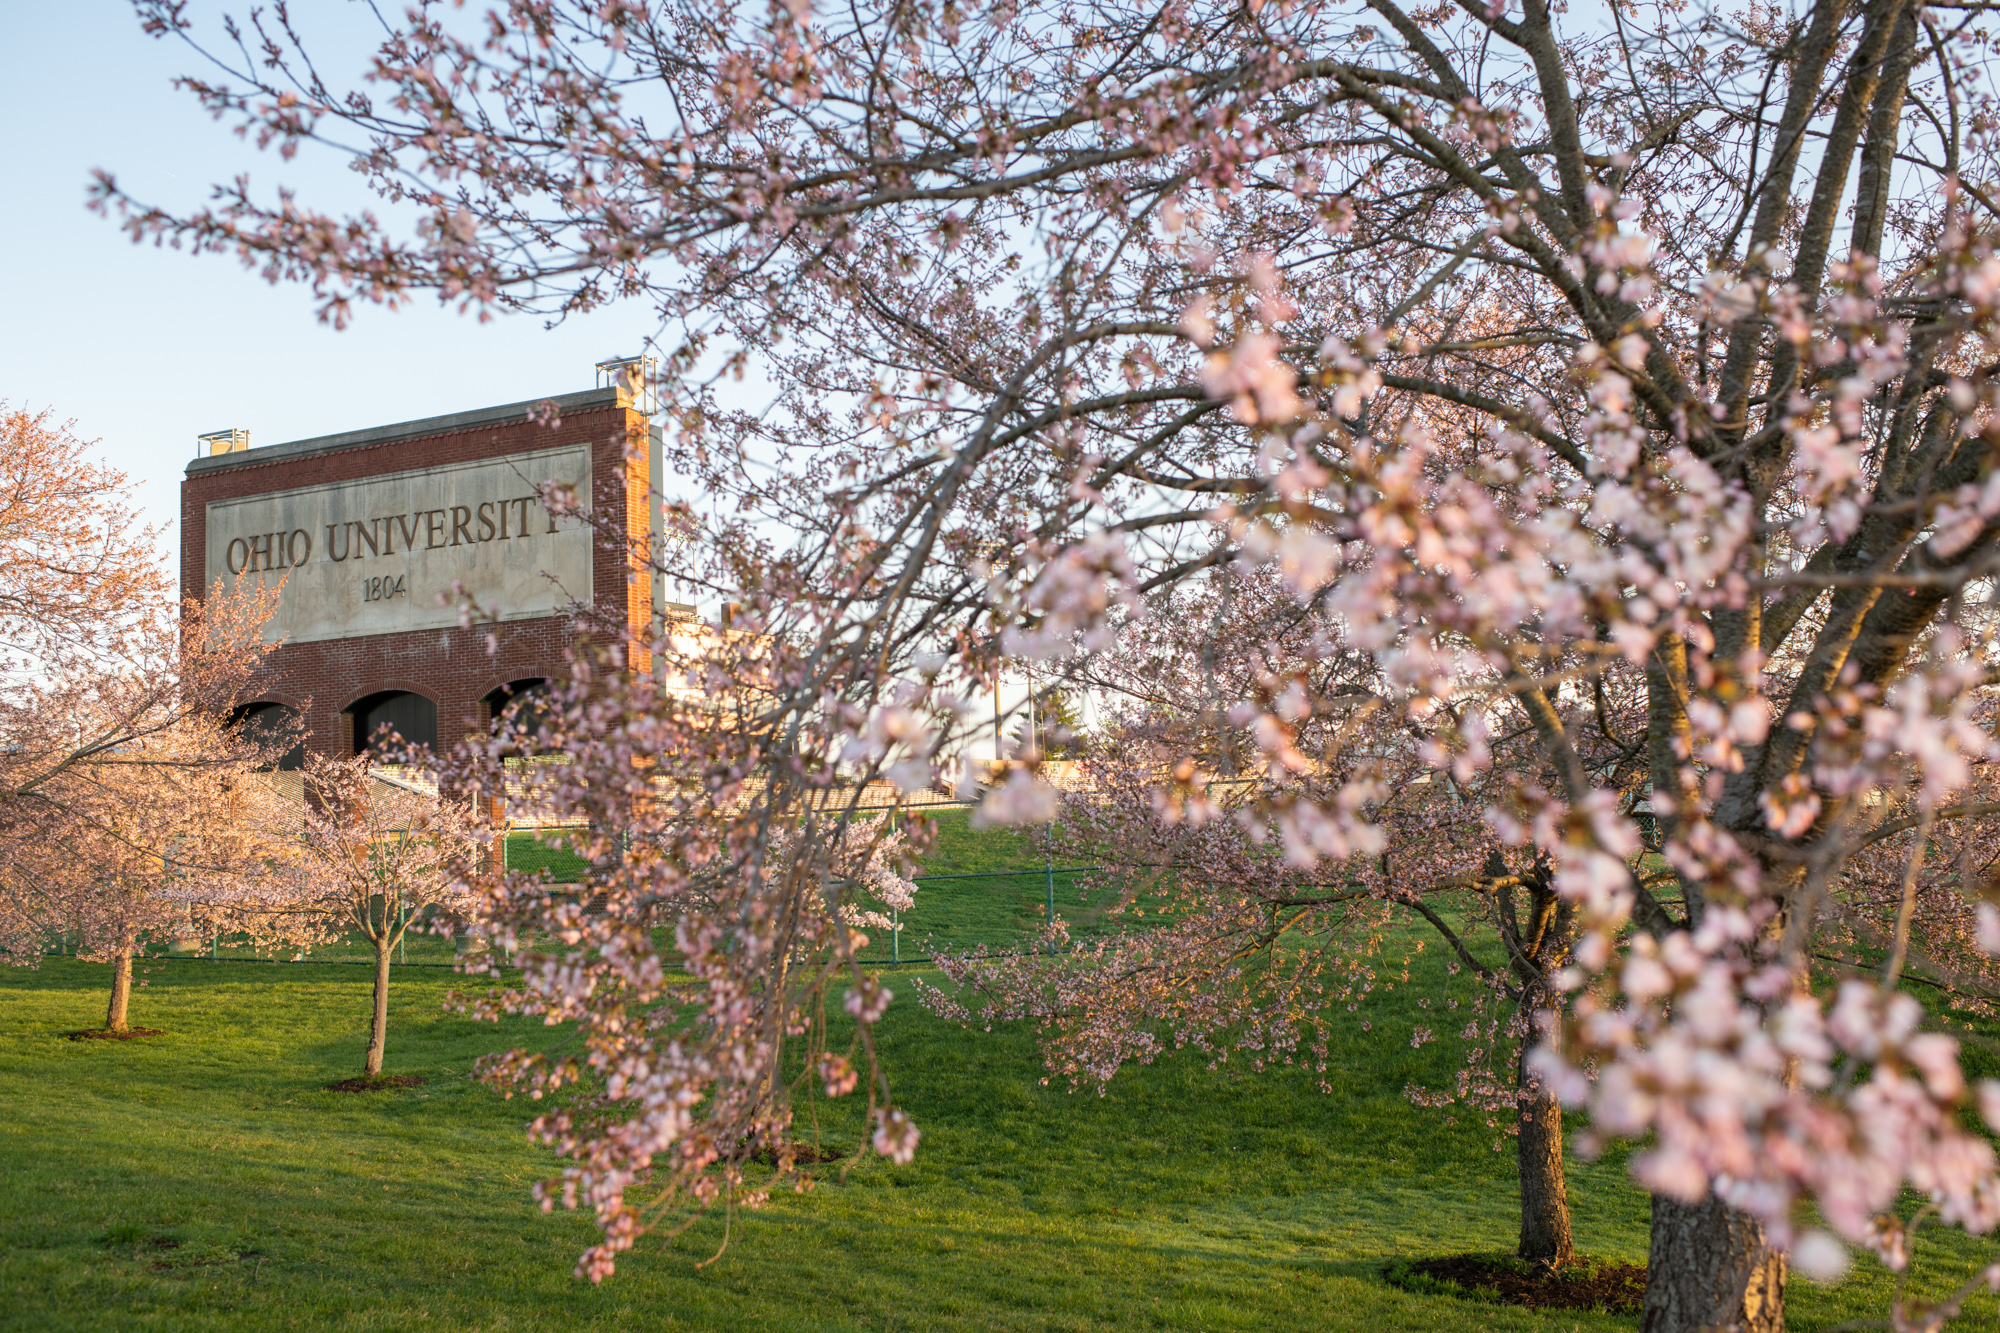 Blooming Cherry Blossom trees outside the Ohio Bobcats Peden Stadium